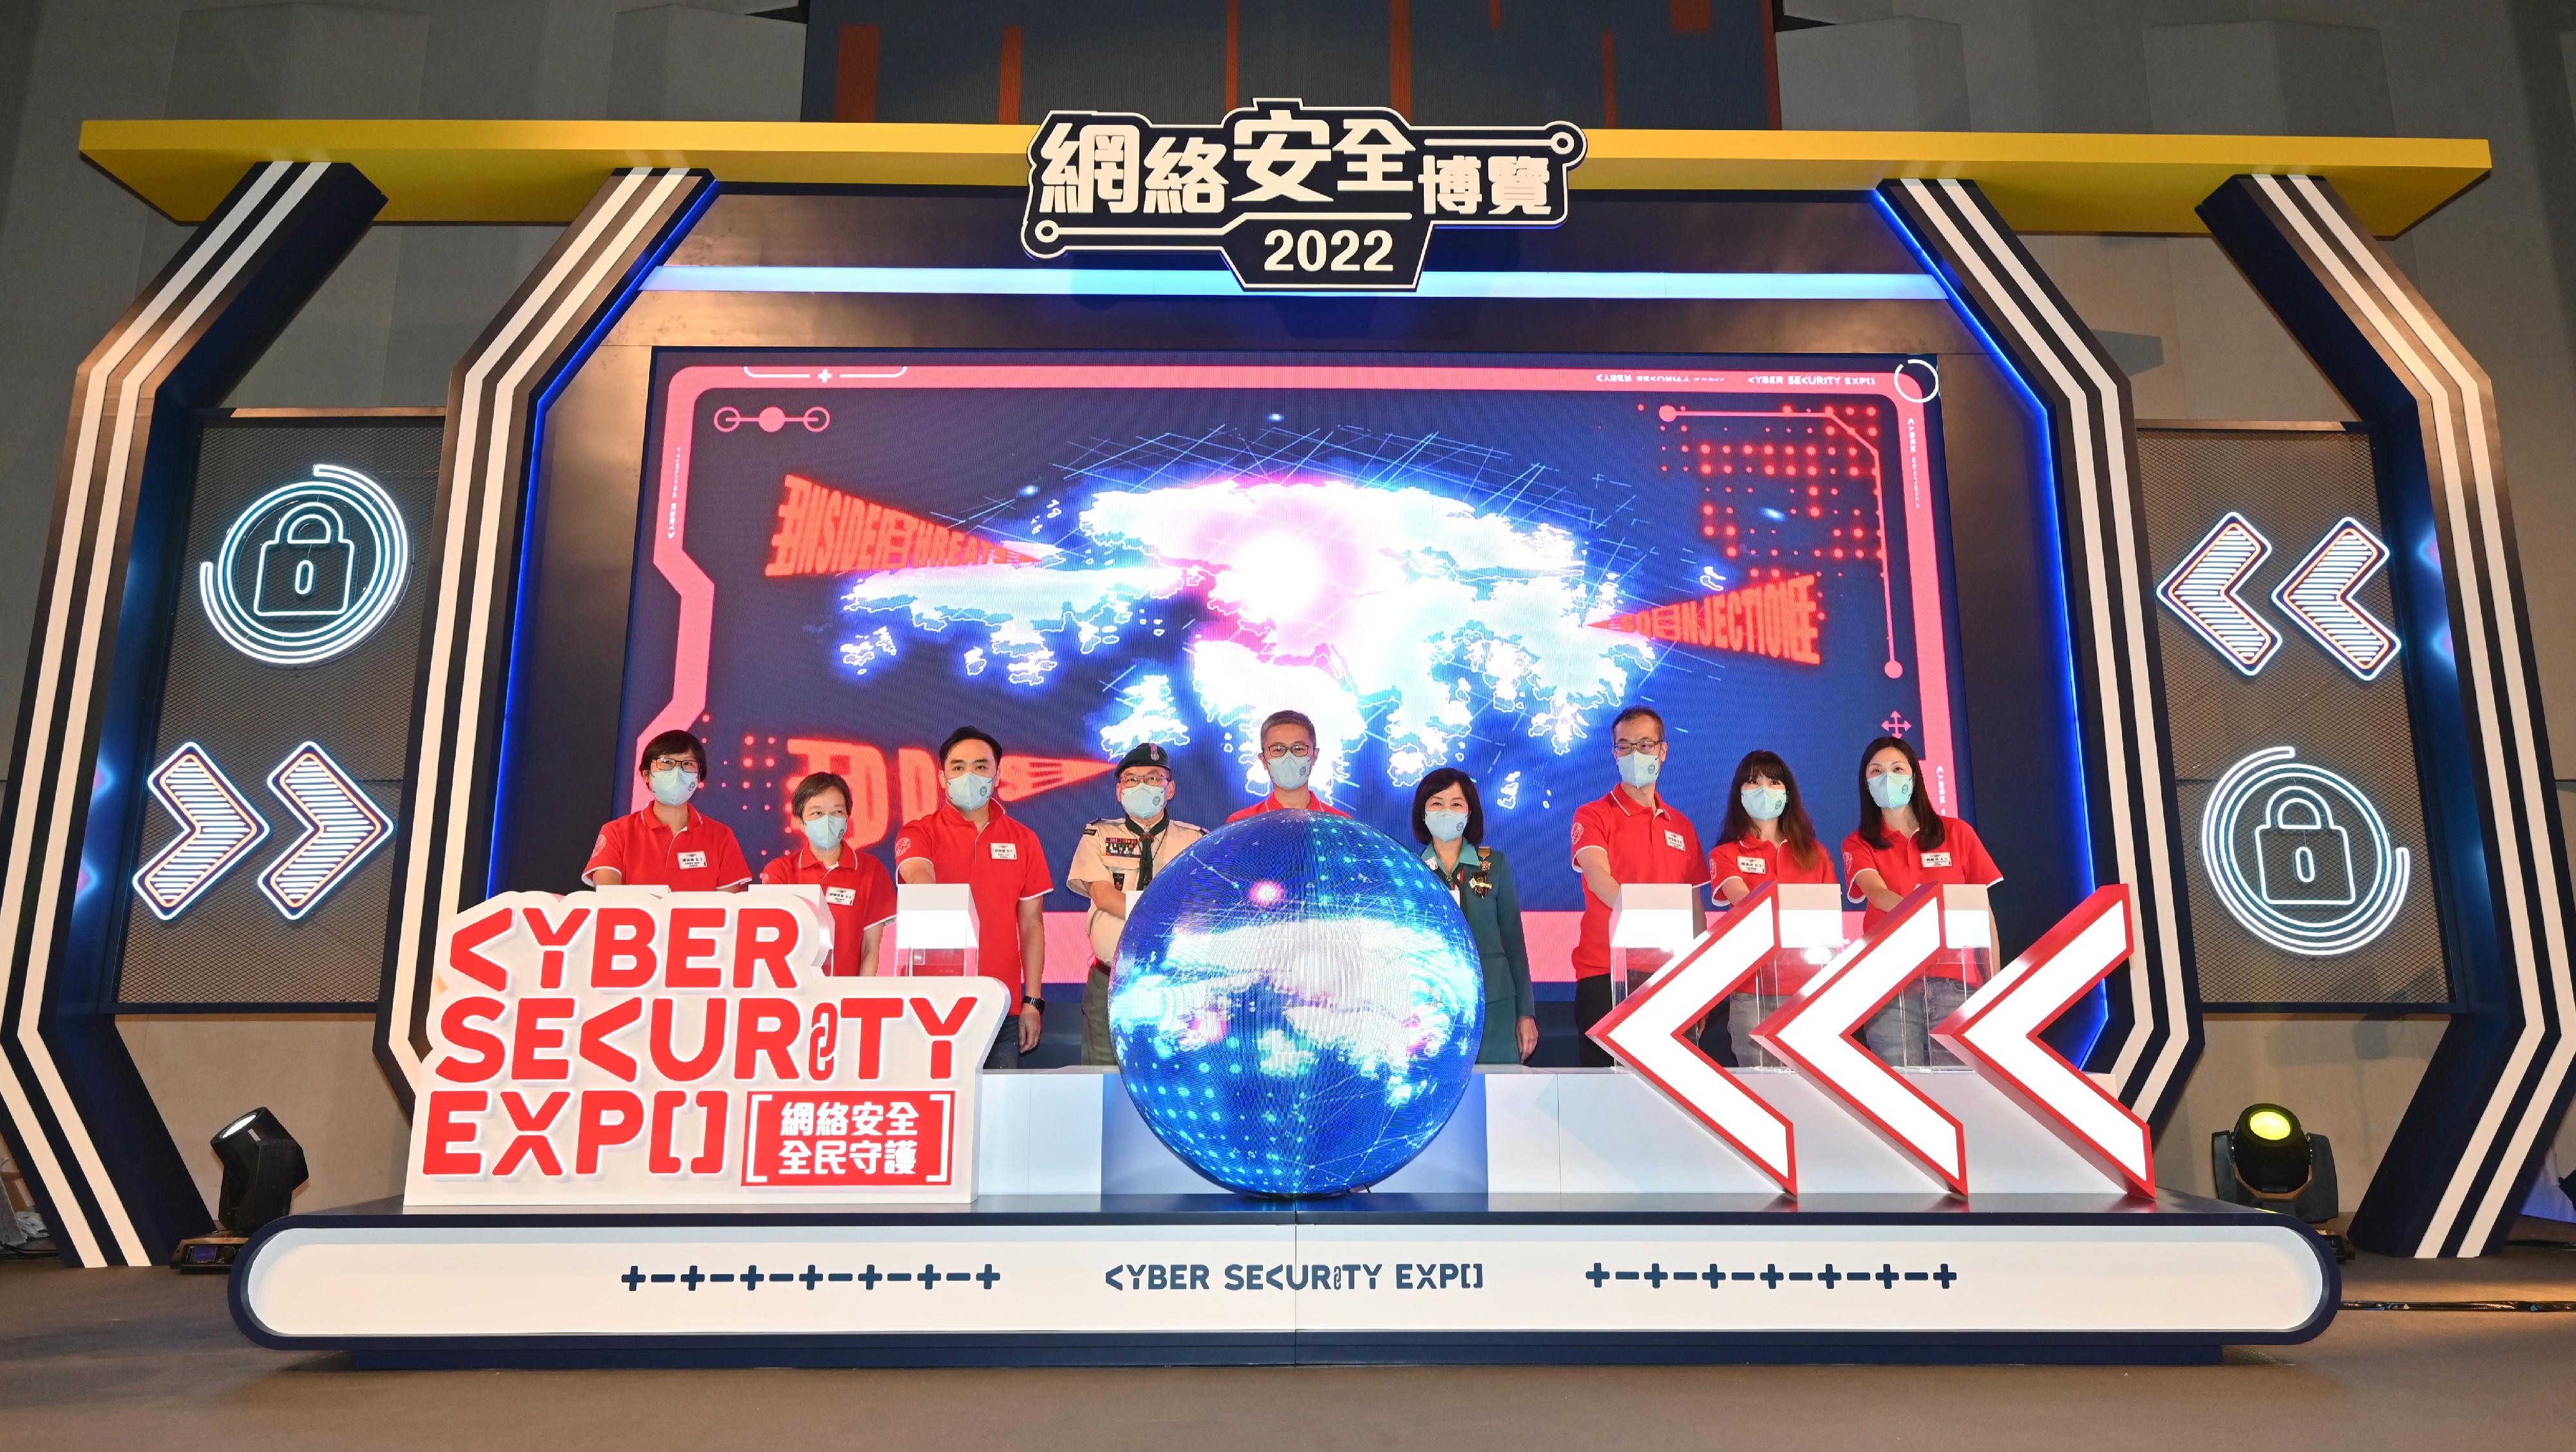 The Cyber Security Expo 2022 kicks off today (September 17). Photo shows the Commissioner of Police, Mr Siu Chak-yee (centre); the Chief Commissioner of the Scout Association of Hong Kong, Mr Joseph Lau (fourth left); the Chief Commissioner of the Hong Kong Girl Guides Association, Ms Jeanne Lee (fourth right); the Deputy Commissioner of Police (Operations), Mr Yuen Yuk-kin (third left); the Director of Crime and Security, Mr Yip Wan-lung (third right); the Deputy Secretary for Education, Mrs Hong Chan Tsui-wah (second left); the Deputy Head of Marketing of the Hong Kong Science and Technology Park Corporation, Ms Hilda Chan (second right); the Assistant Commissioner of Police (Crime), Ms Chung Wing-man (first left); and the Chief Superintendent of the Cyber Security and Technology Crime Bureau, Ms Cheng Lai-ki (first right), officiating at the opening ceremony.